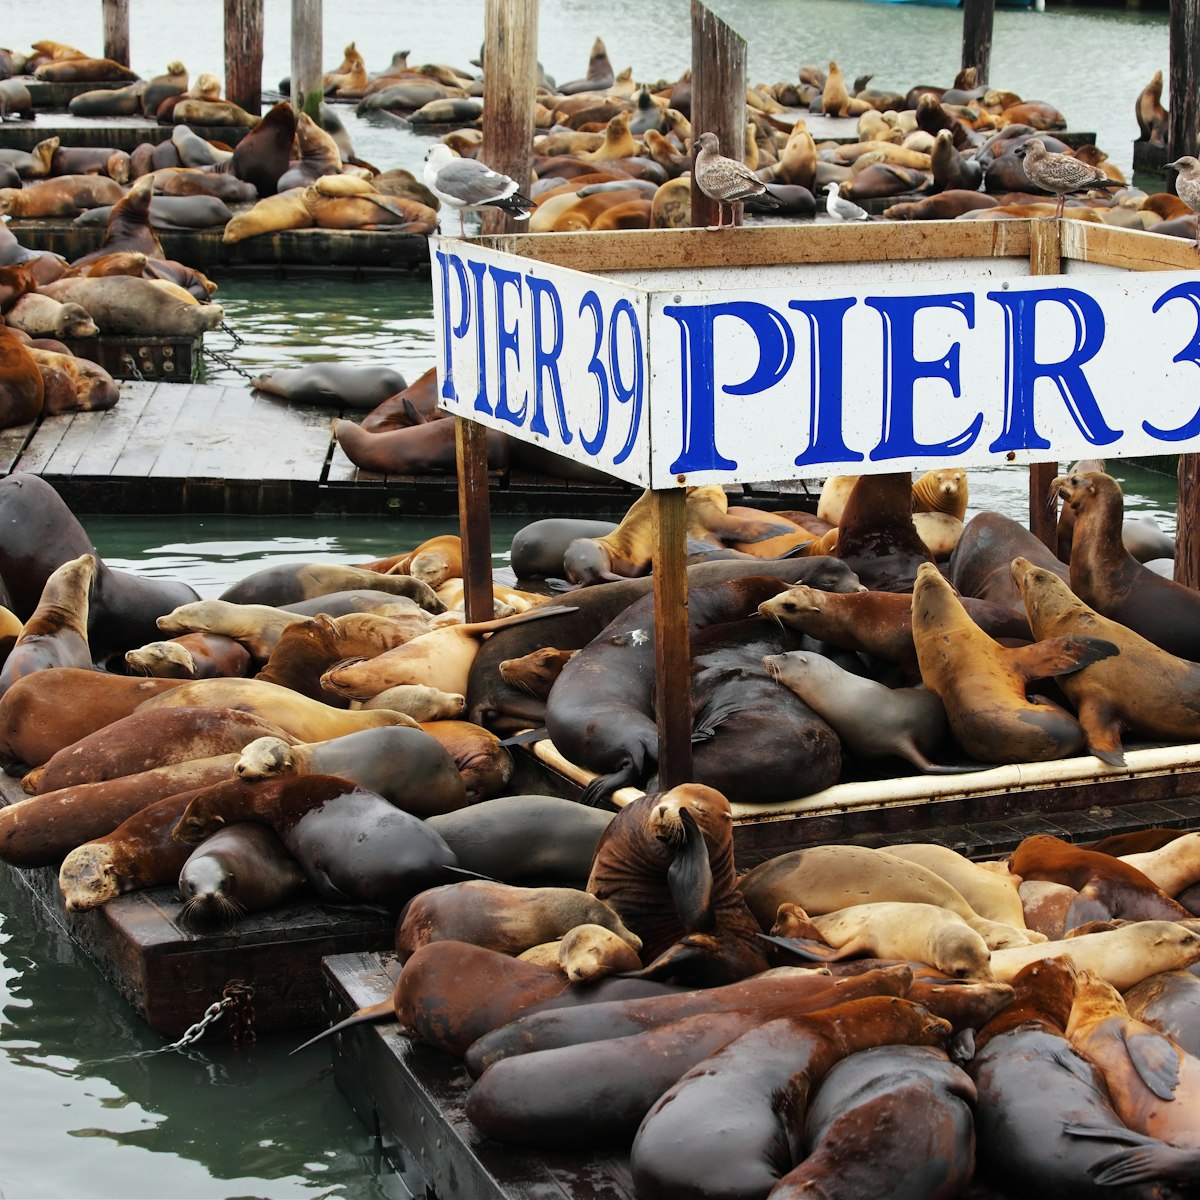 The well-known Pier 39 in San Francisco with sea lions. Animals are heated on wooden platforms; Shutterstock ID 47875621; Your name (First / Last): Josh Vogel; Project no. or GL code: 56530; Network activity no. or Cost Centre: Online-Design; Product or Project: 65050/7529/Josh Vogel/LP.com Destination Galleries